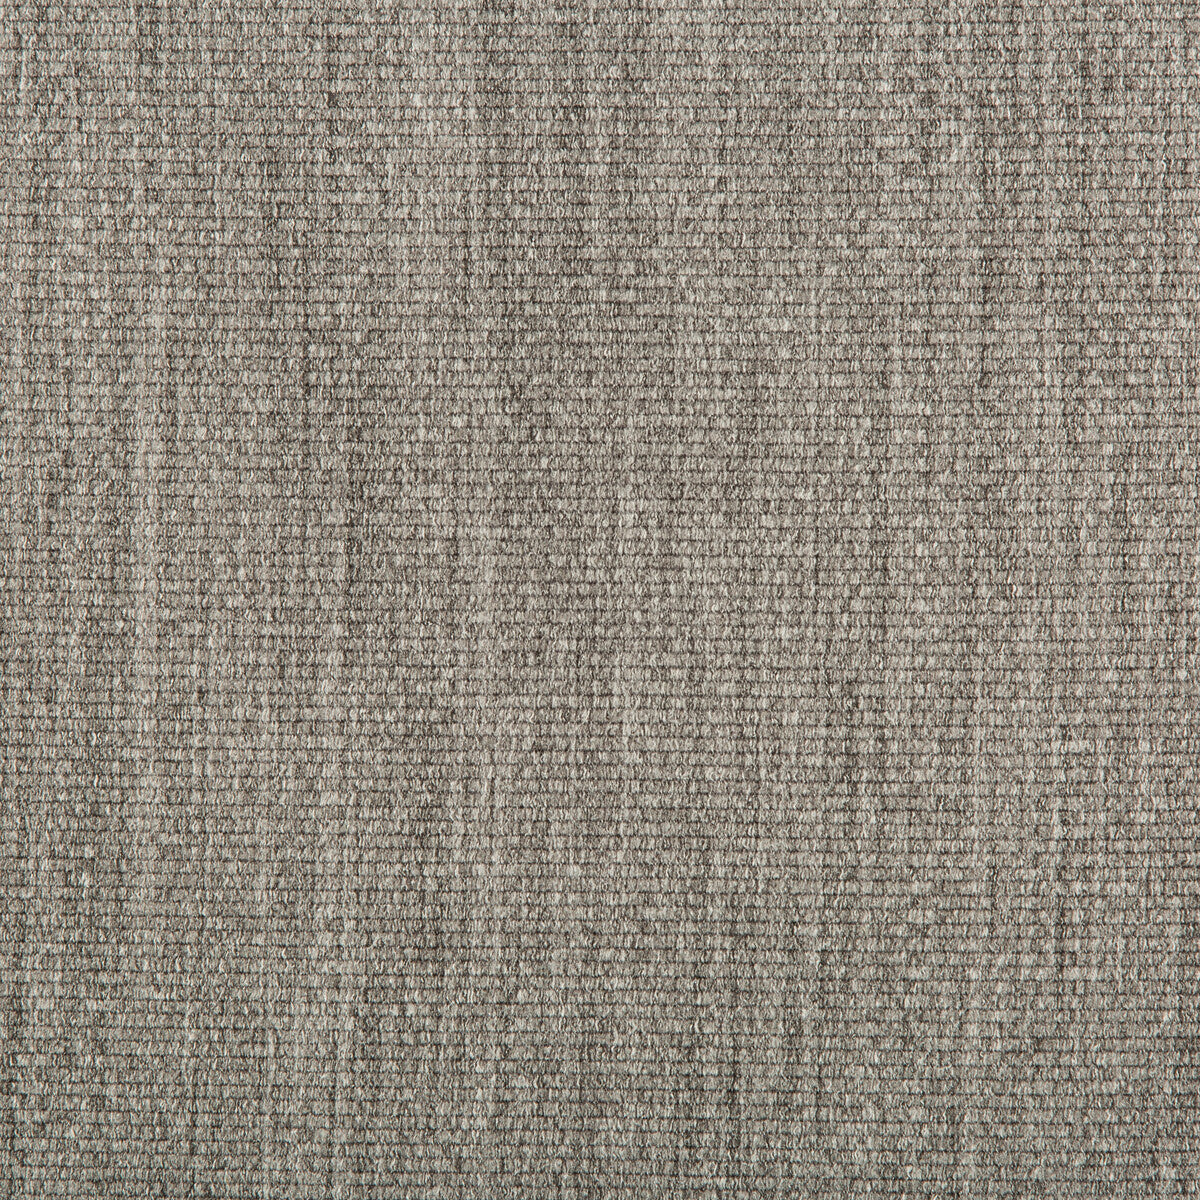 Kravet Contract fabric in 4646-1 color - pattern 4646.1.0 - by Kravet Contract